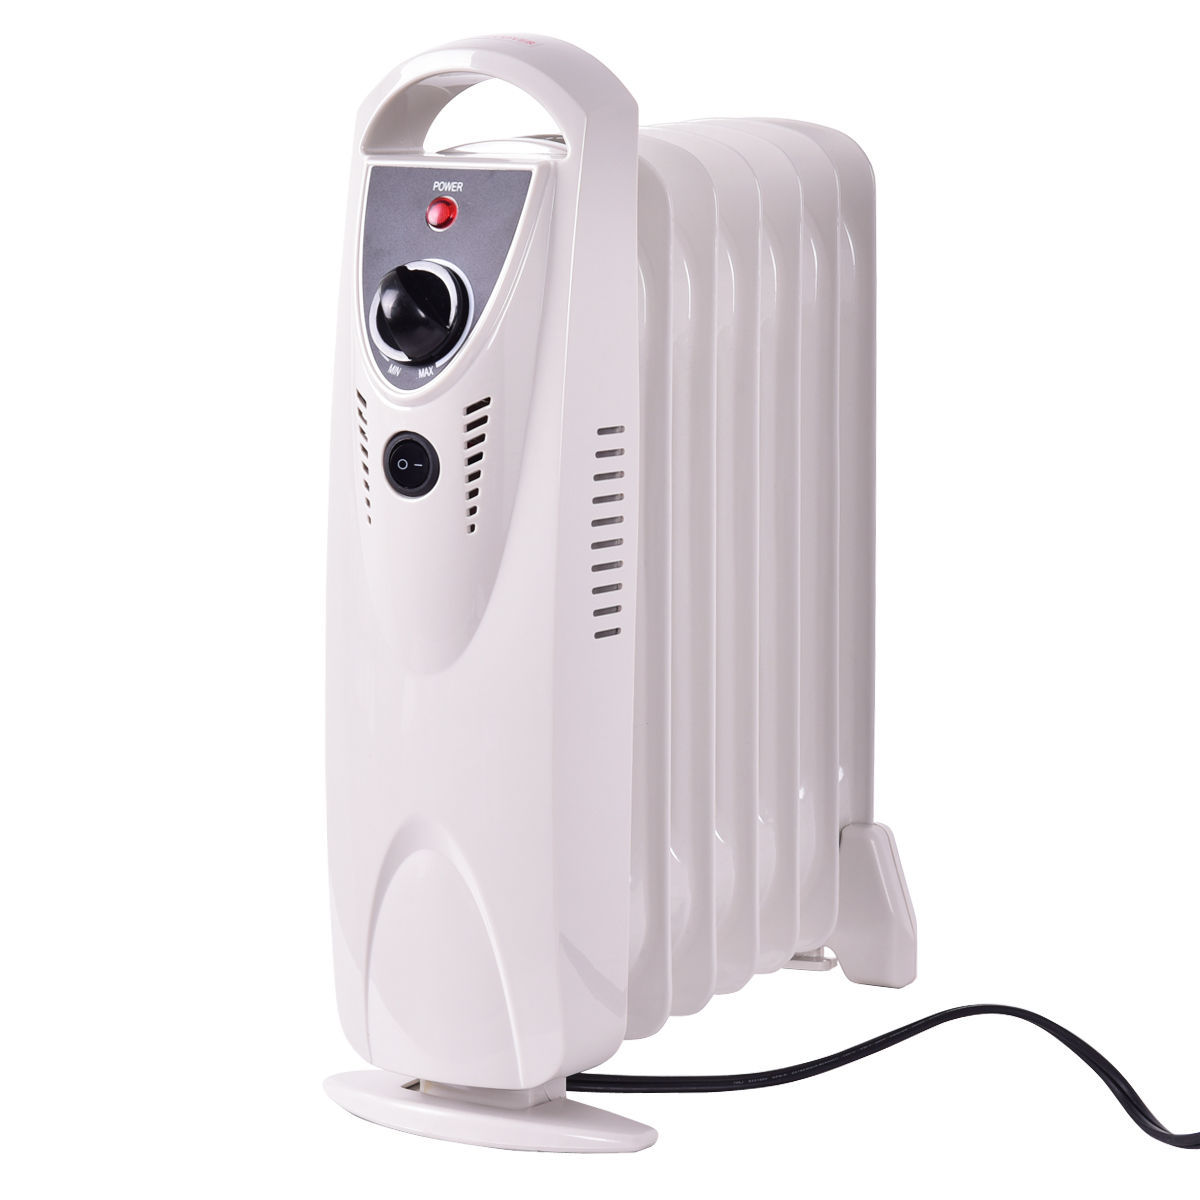 White Safety Cut Off Portable Electric Heater with Adjustable Thermostat Generic OFR260 Oil Filled Radiator 2000 W 9 Fin 